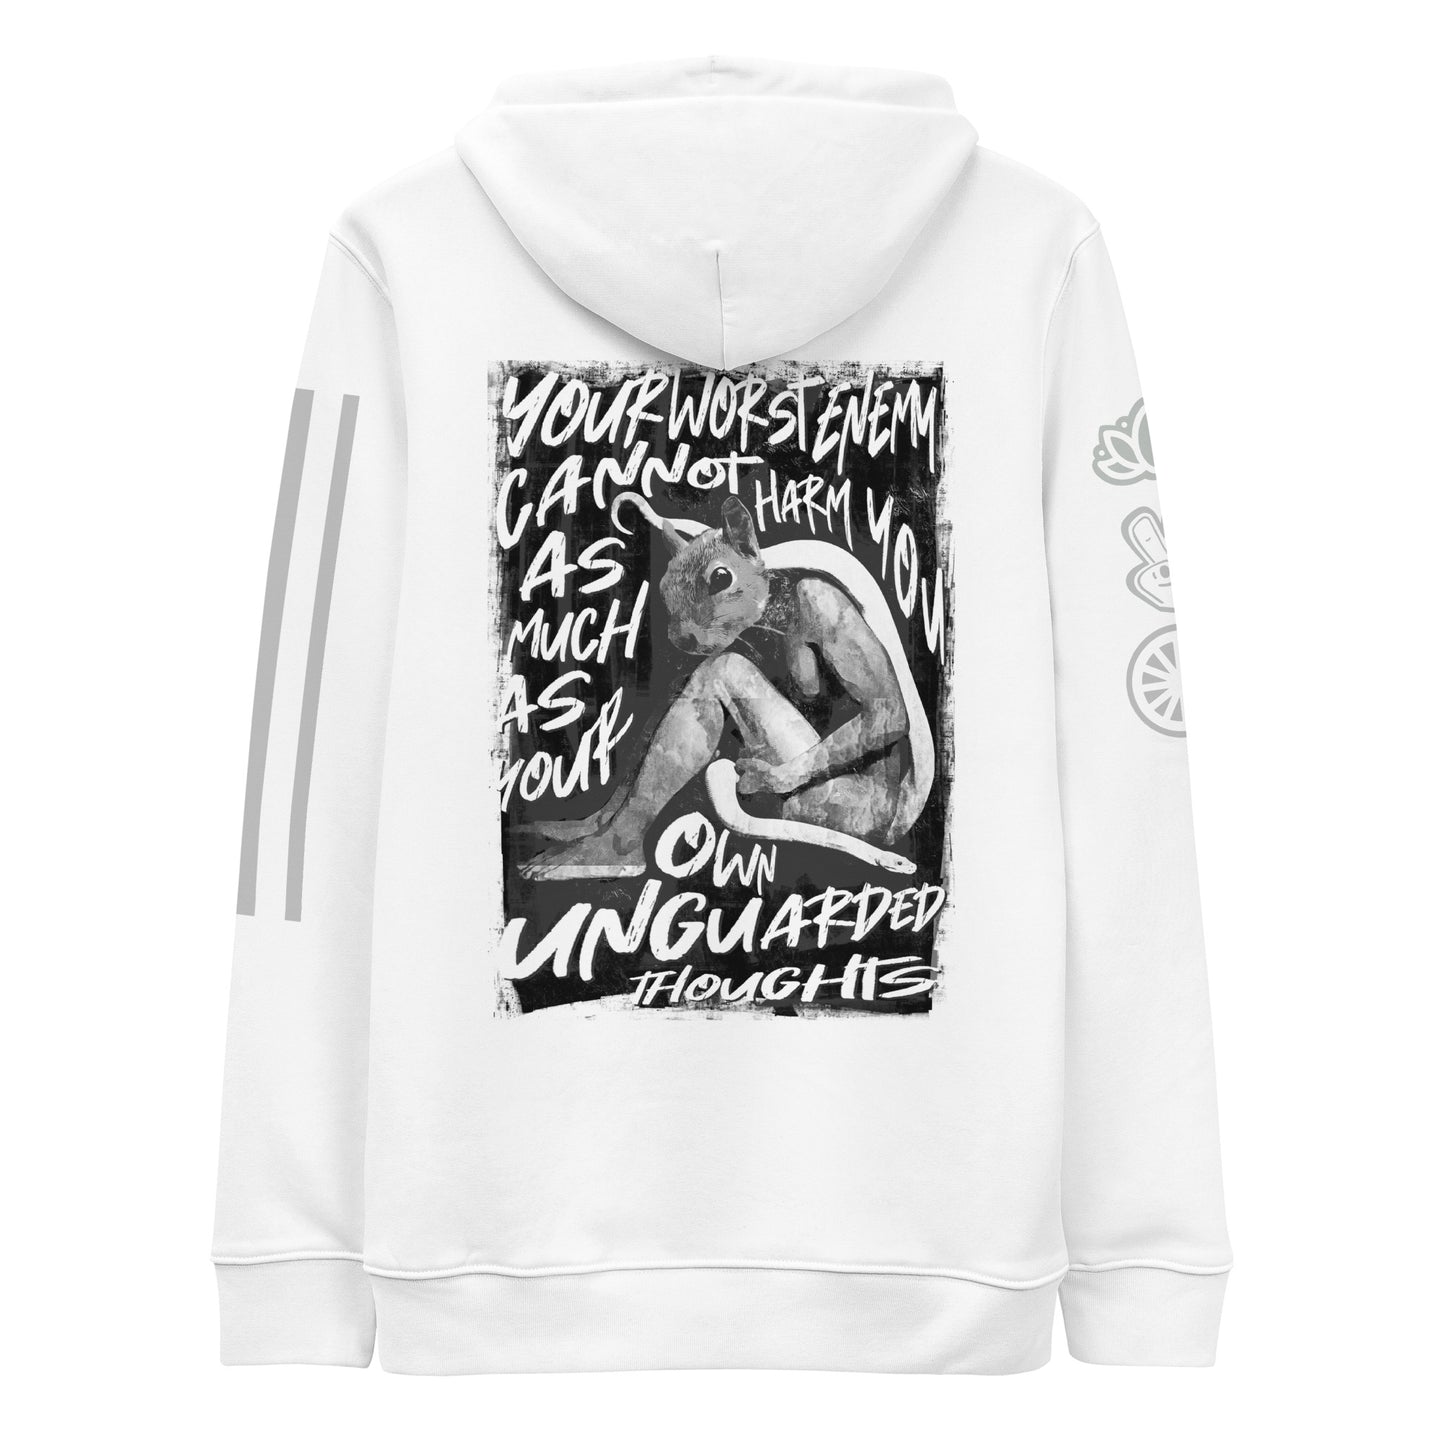 "Nix Unguarded Thoughts" Unisex Eco-friendly Hoodie